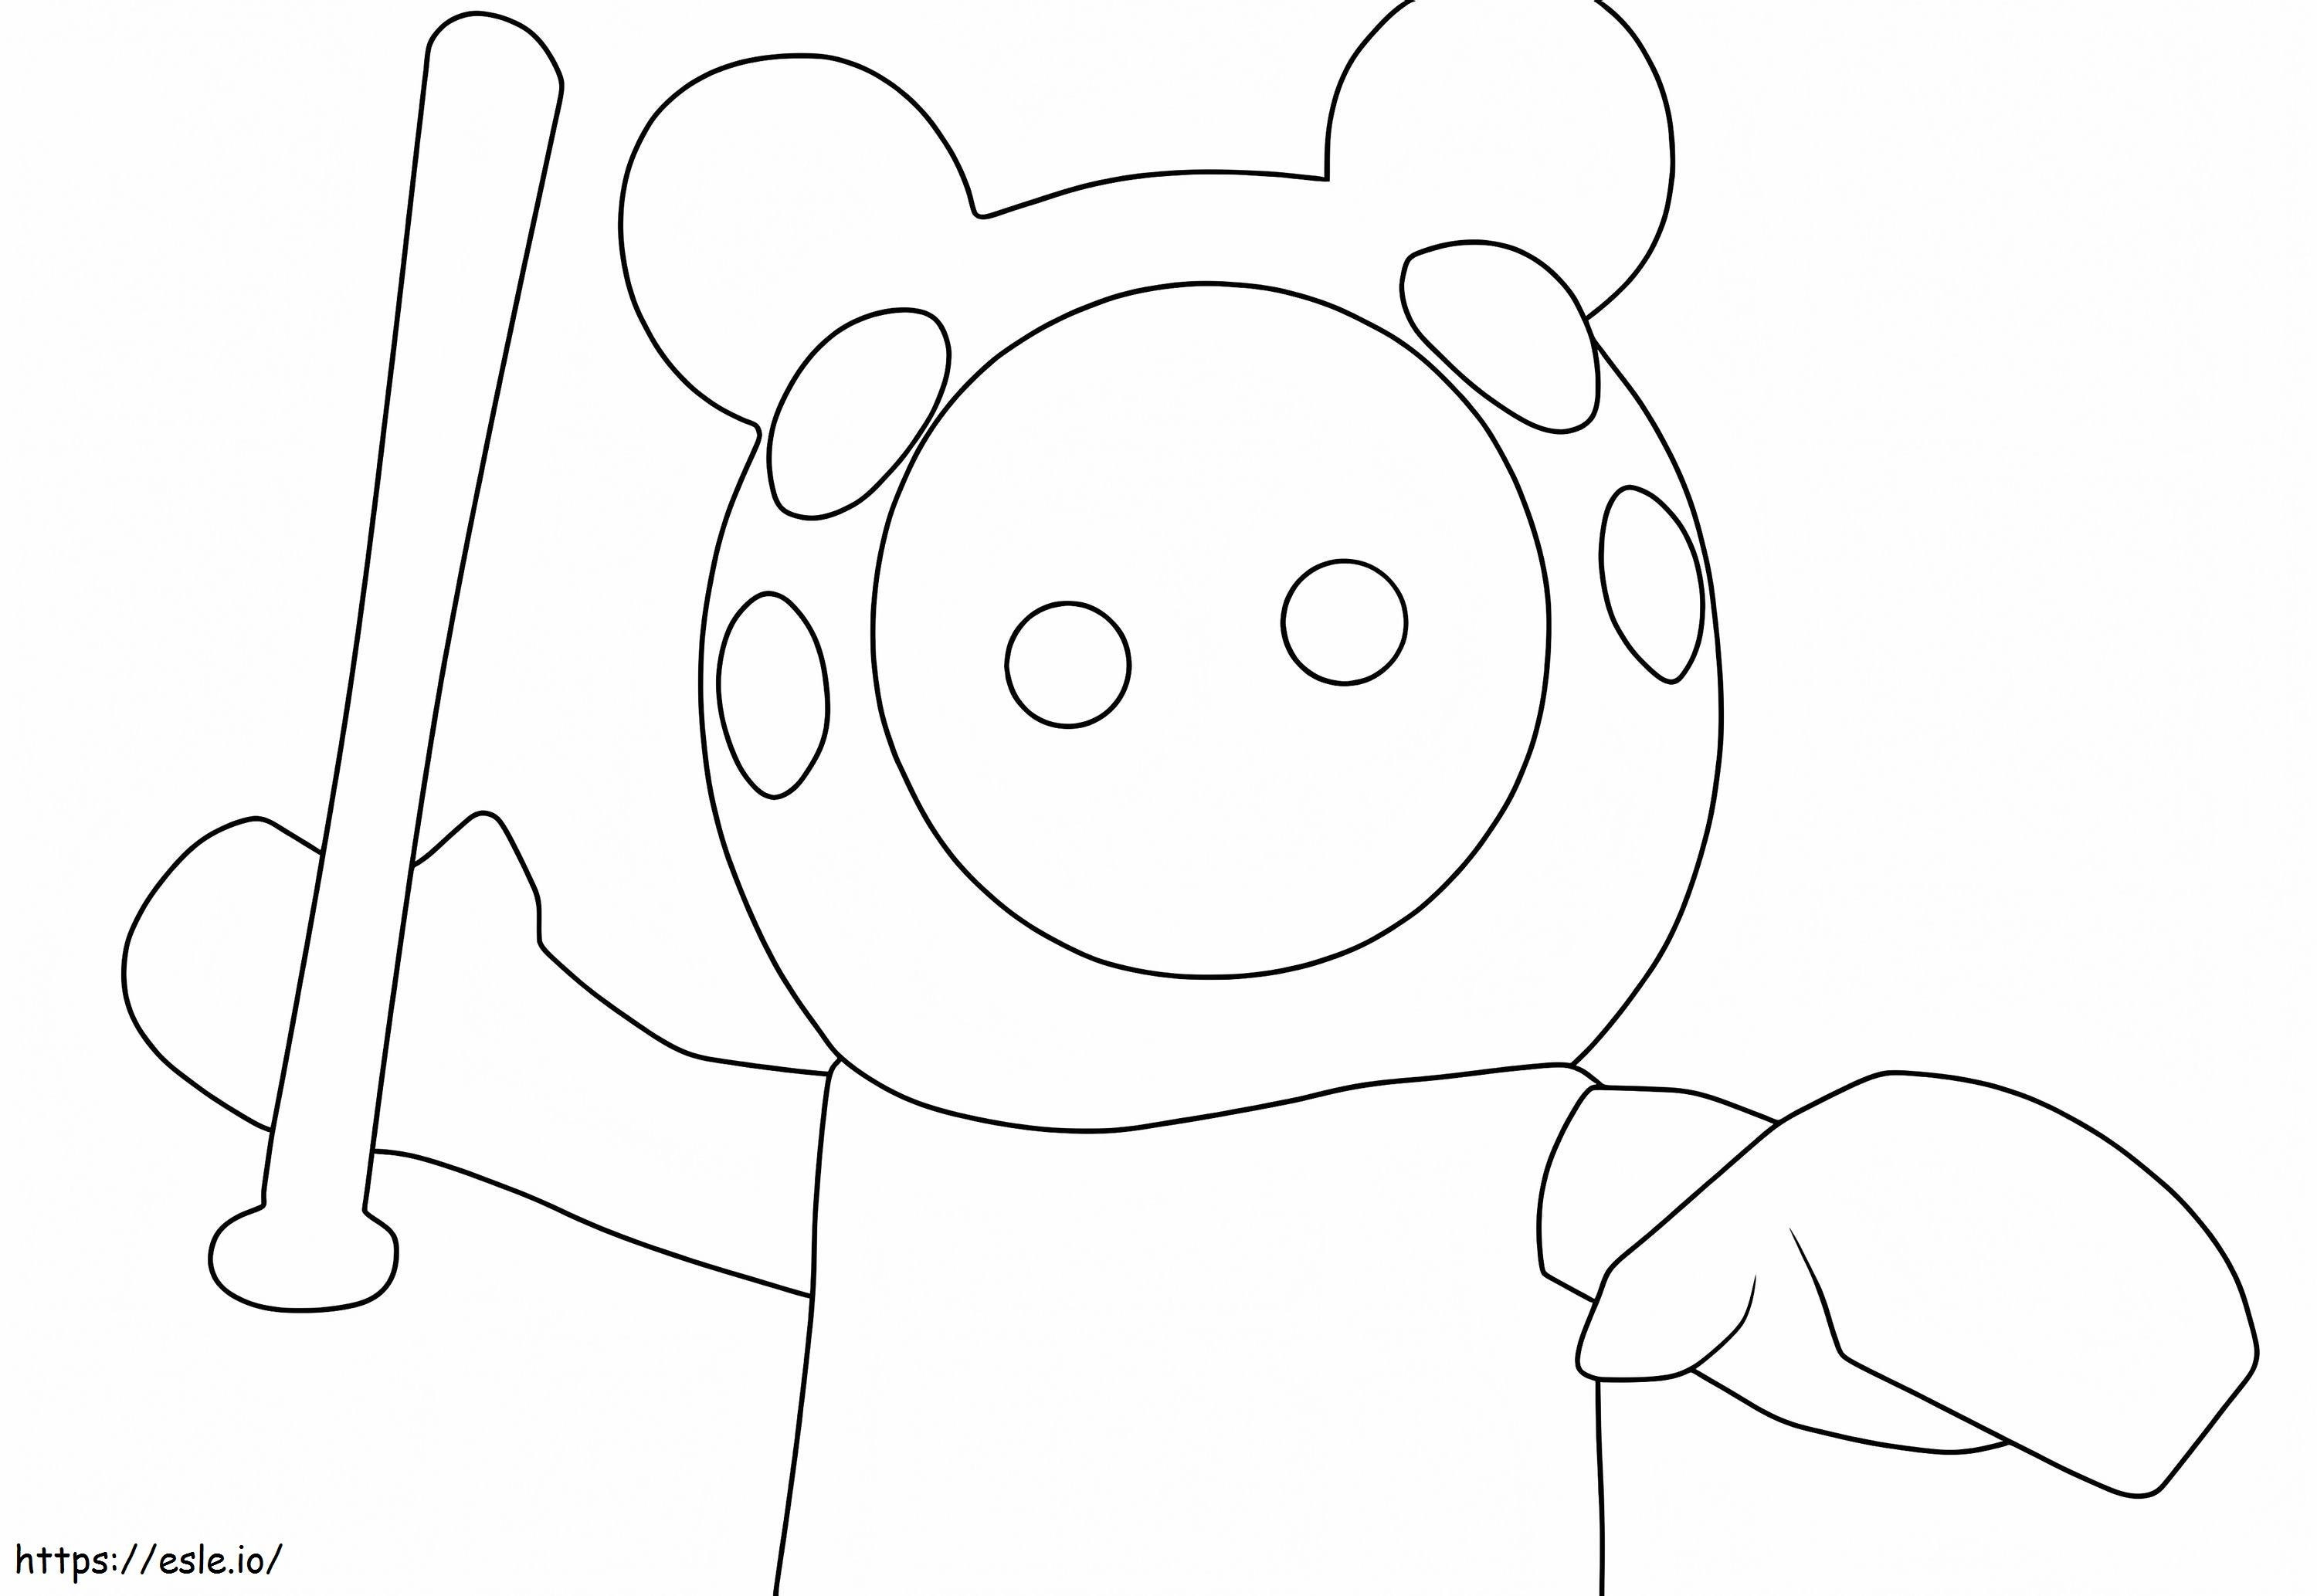 Roblox Piggy Coloring Pages - Get Coloring Pages